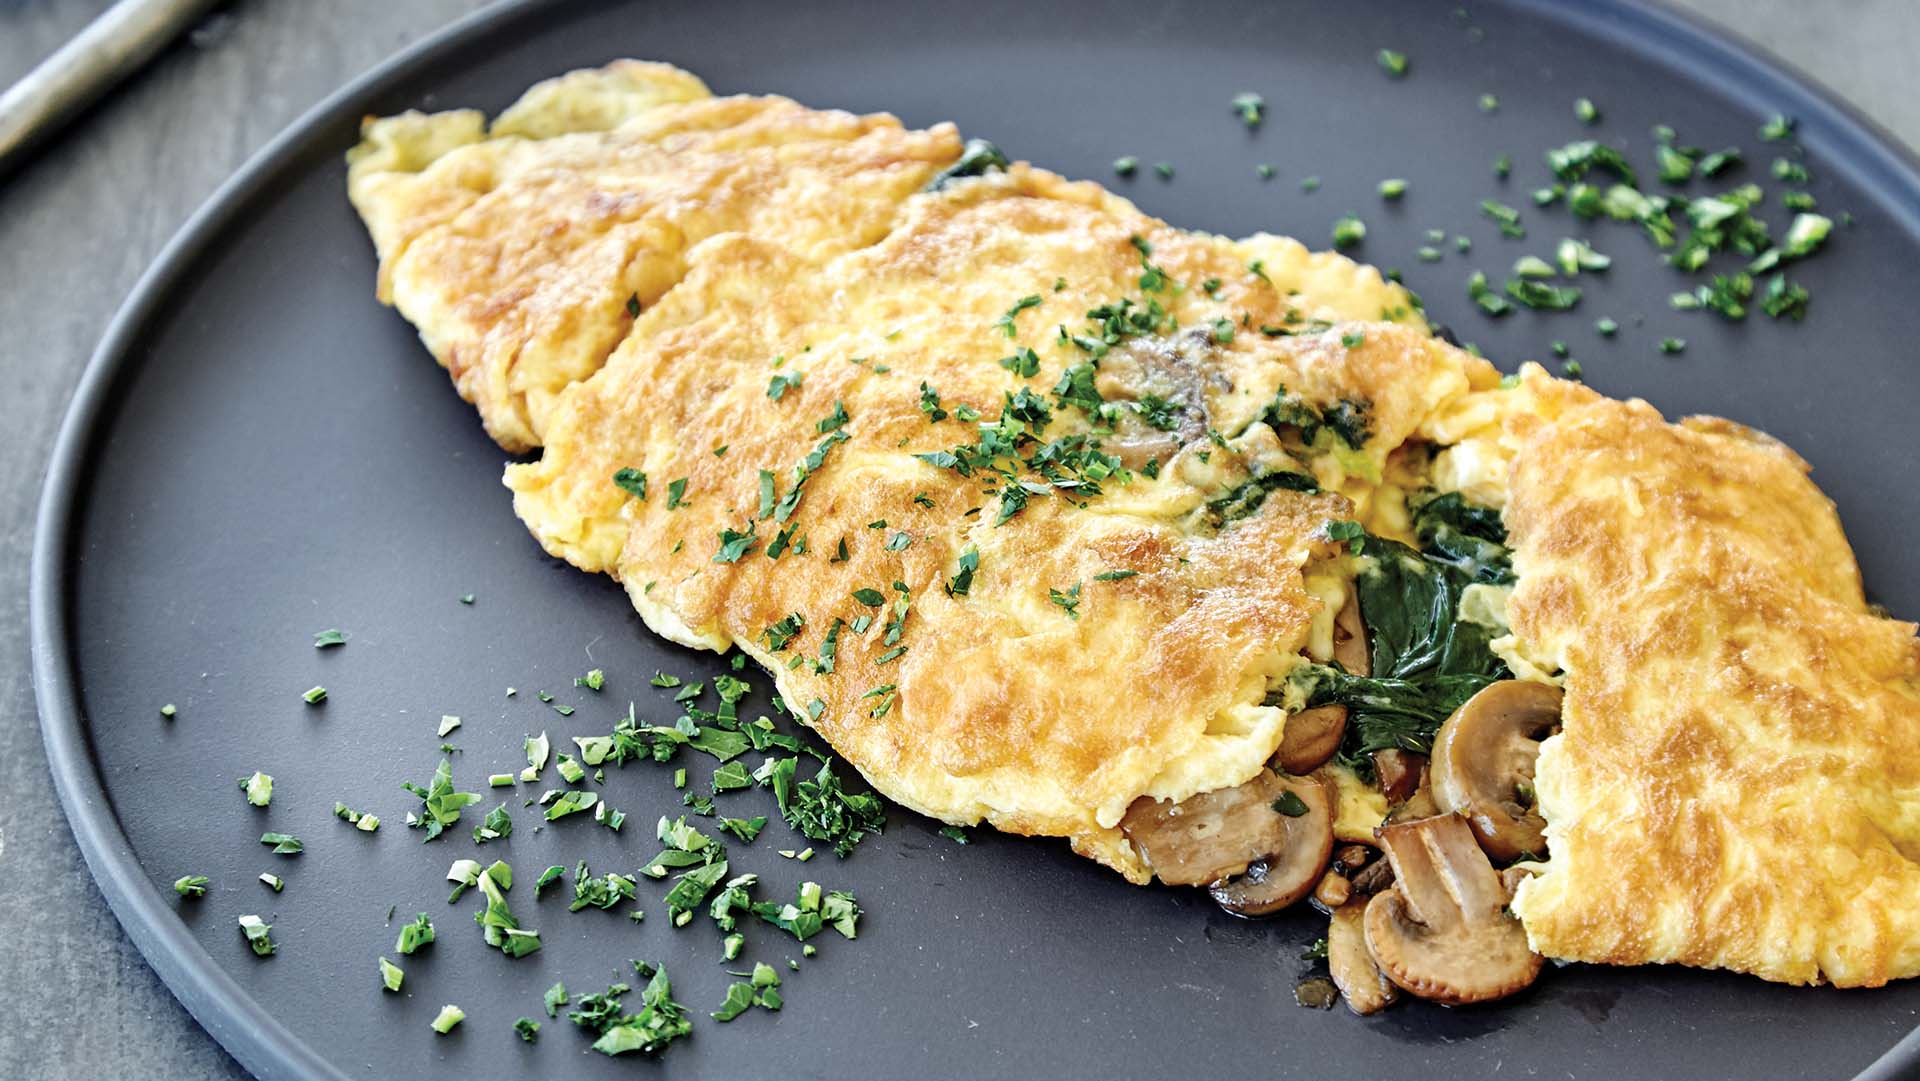 Mushroom omelette with spinach and thyme recipe | Live Better